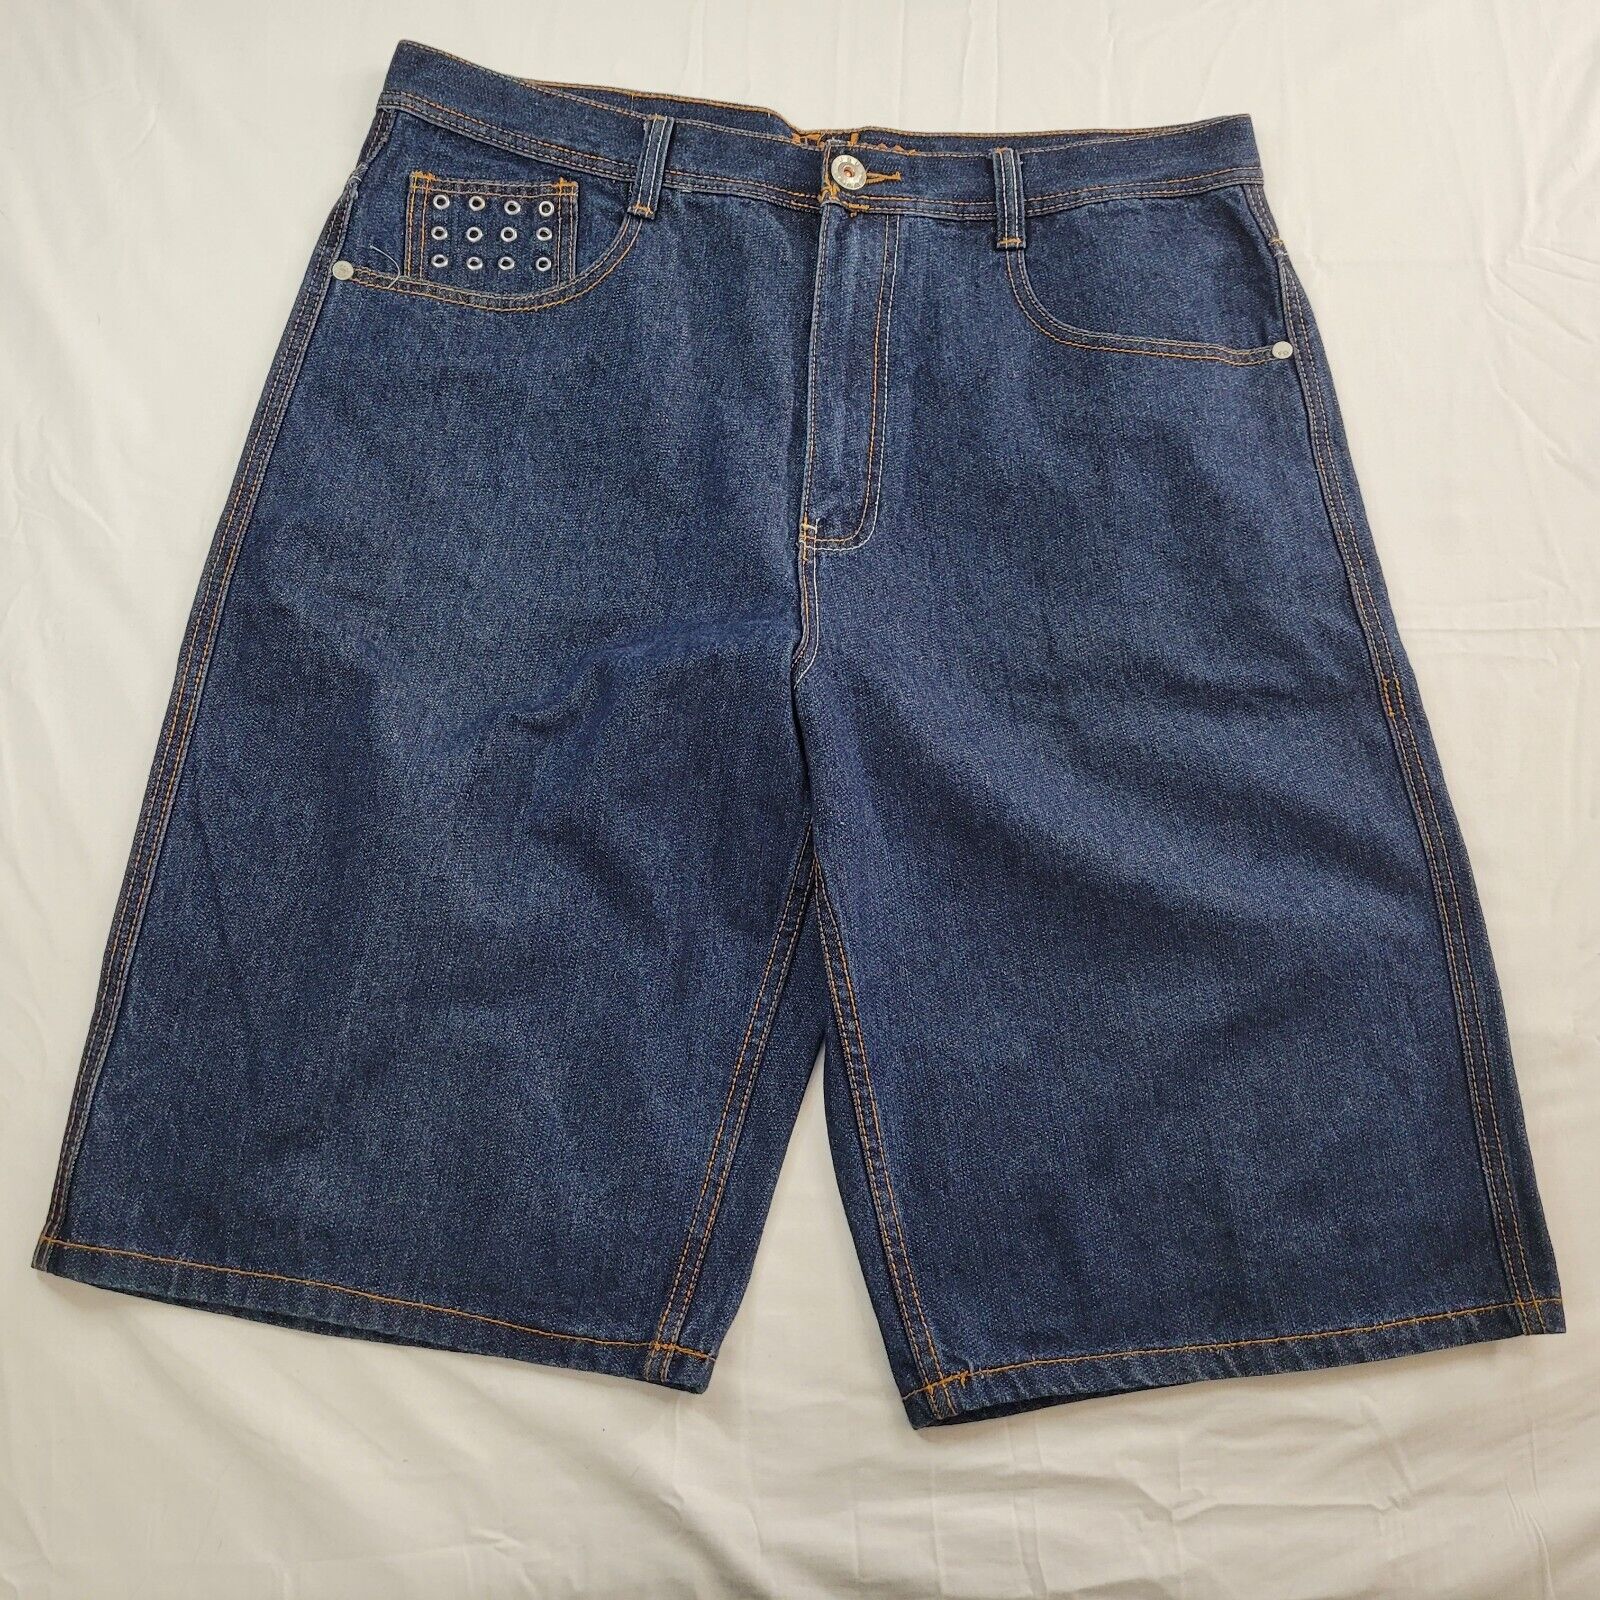 Read more about the article FUBU The Collection Men Shorts  40 x 18 Dark Wash Denim Blue Jean Jorts